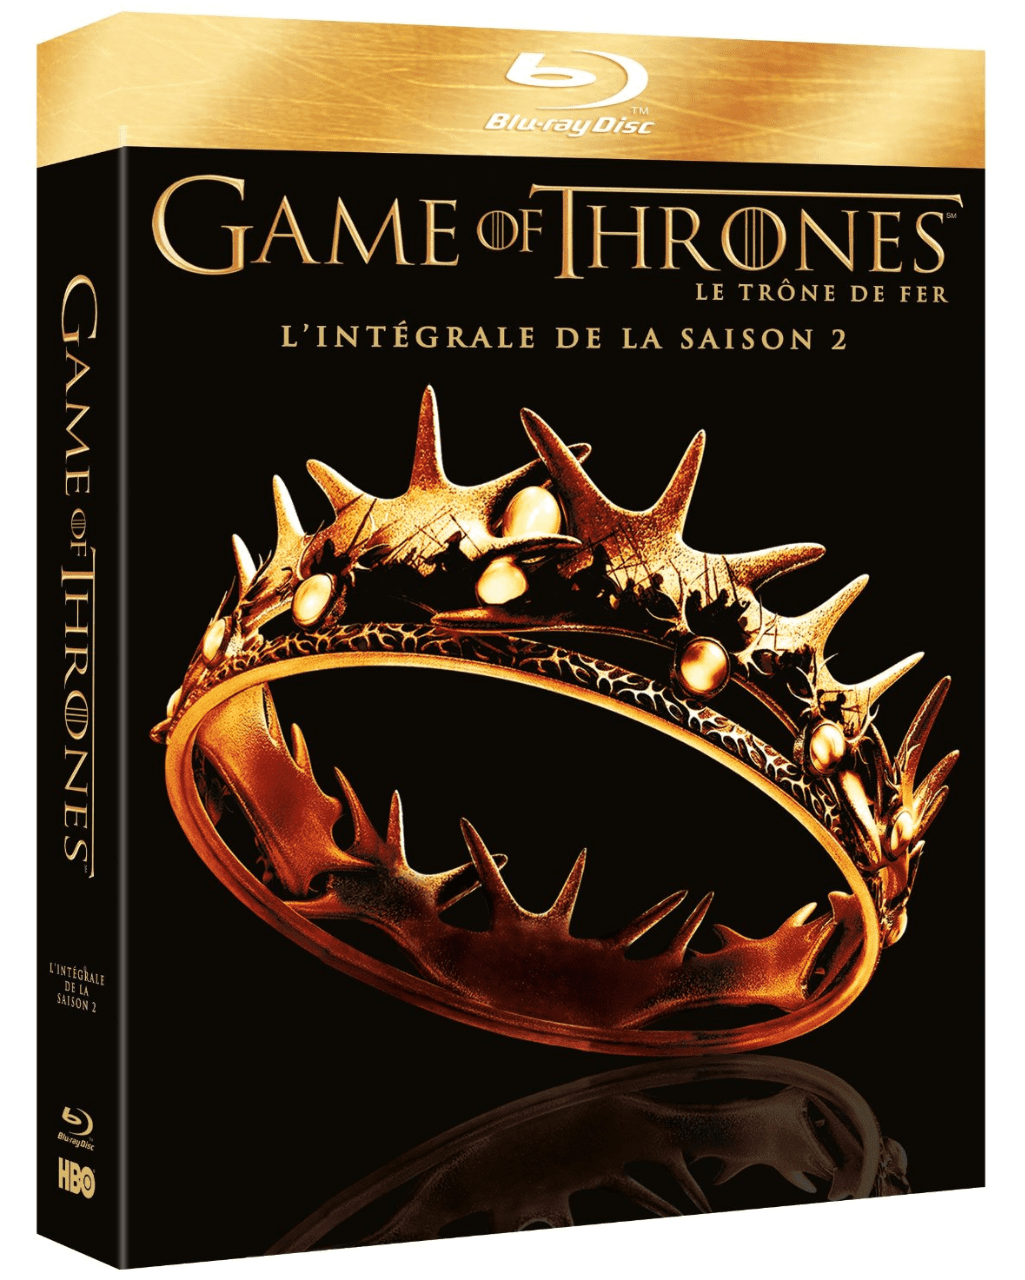 https://www.sodgames.be/img_s1/94103/boutique/game_of_thrones_saison_2-blu-ray-integrale.png